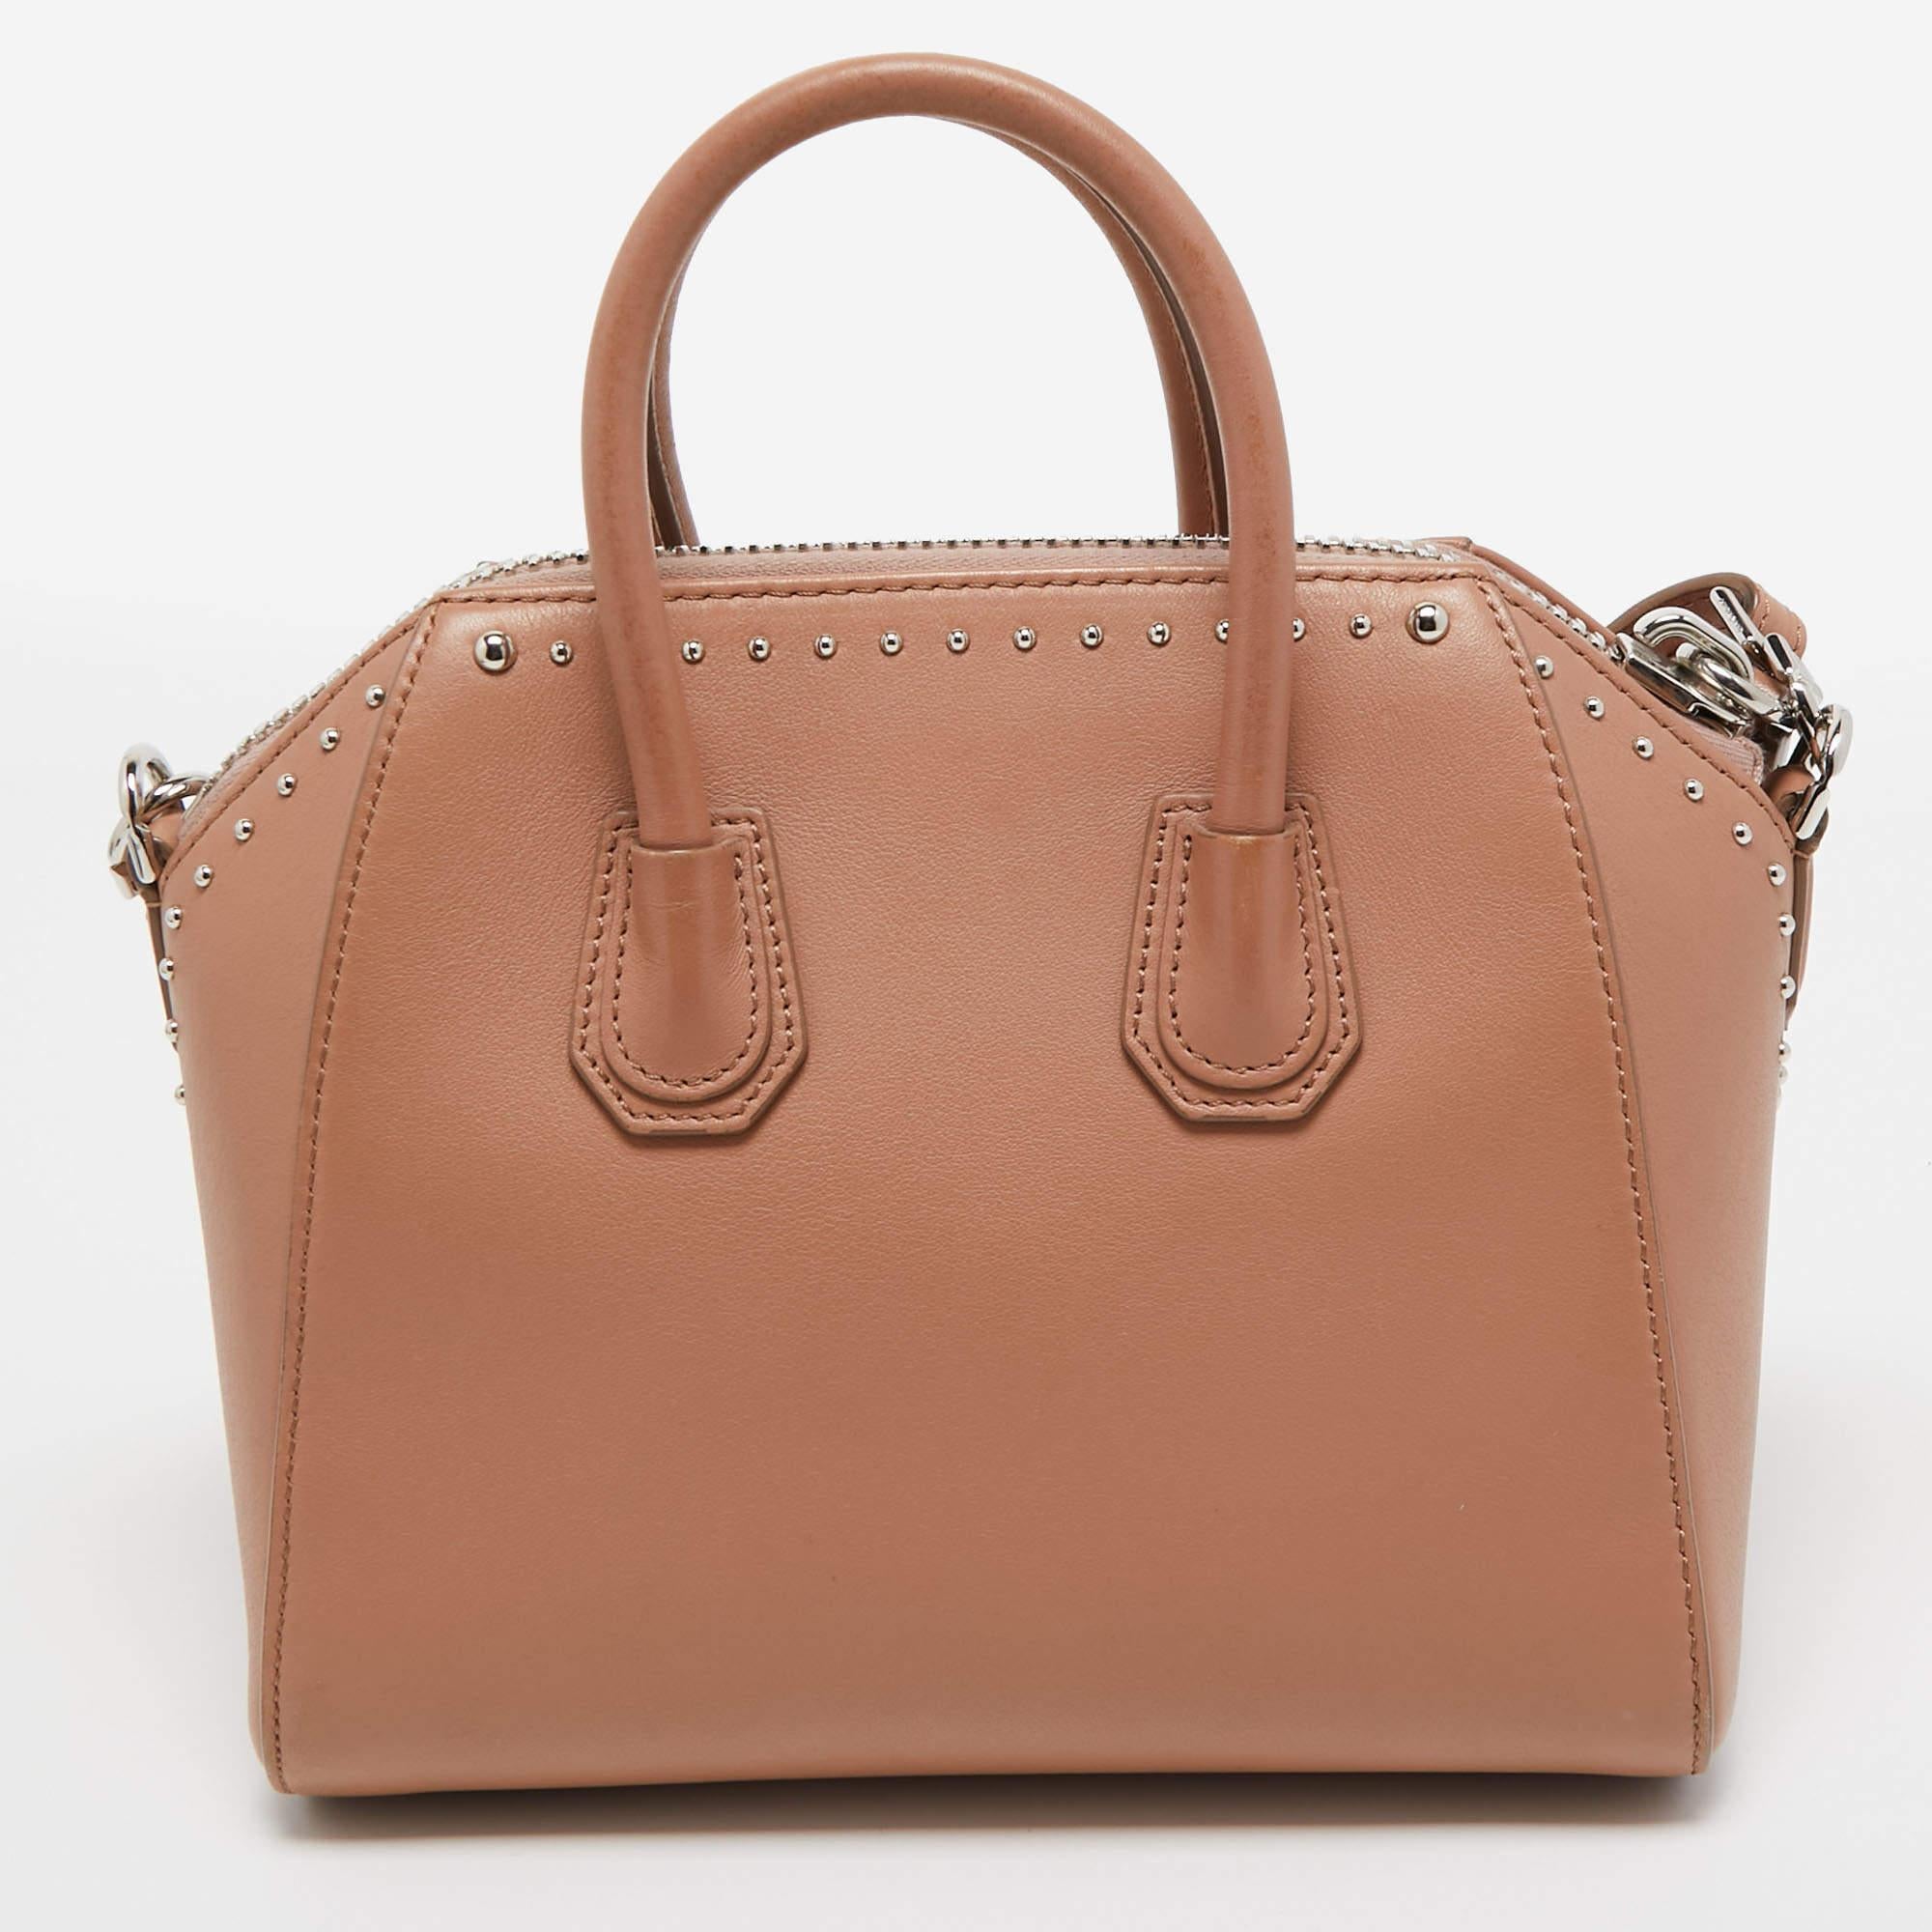 A classic handbag comes with the promise of enduring appeal, boosting your style time and again. This Givenchy Antigona bag is one such creation. It’s a fine purchase.

Includes: Original Dustbag, Detachable Strap